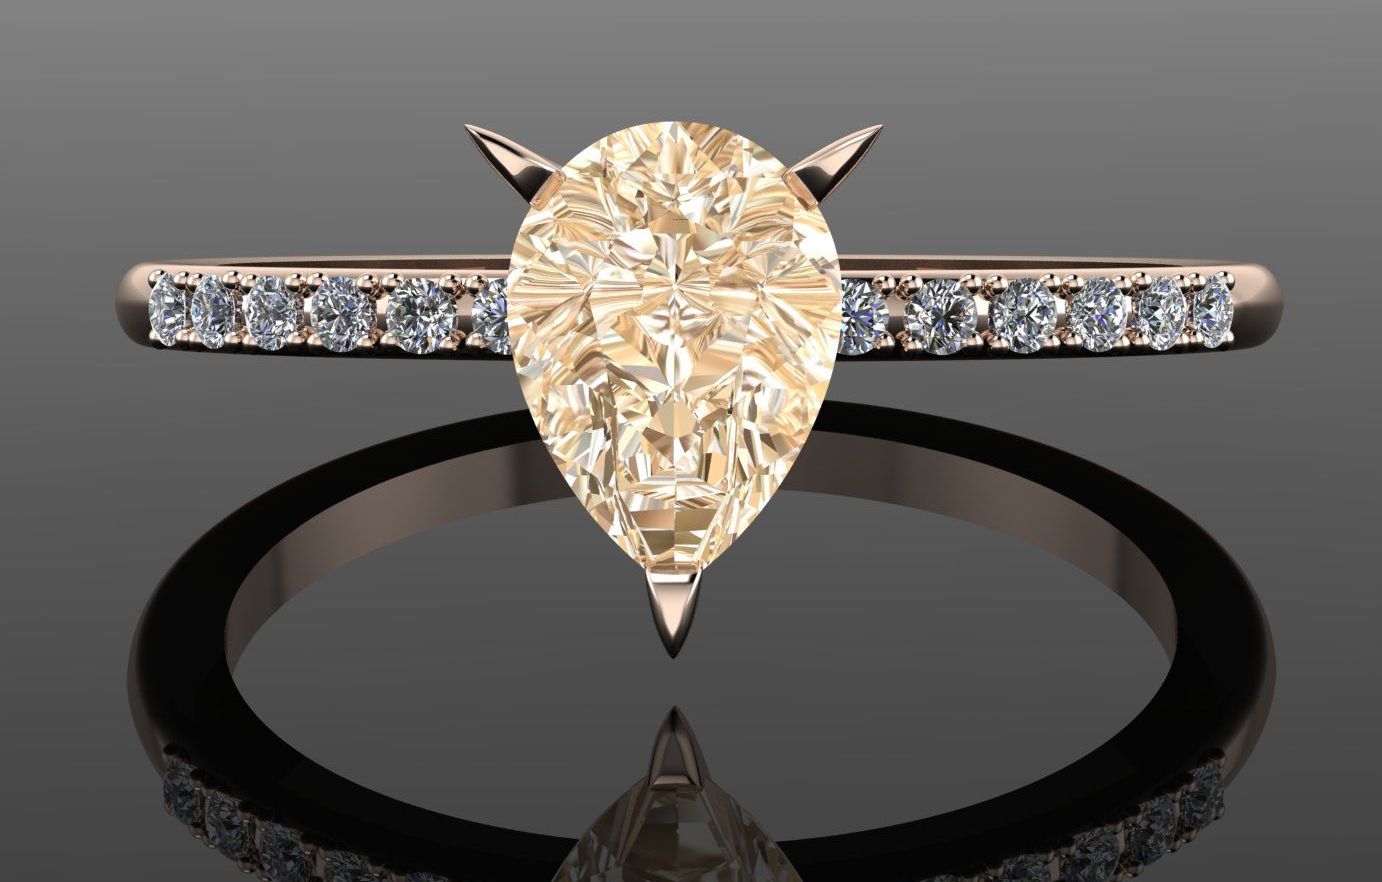 Calista champagne and diamond engagement ring